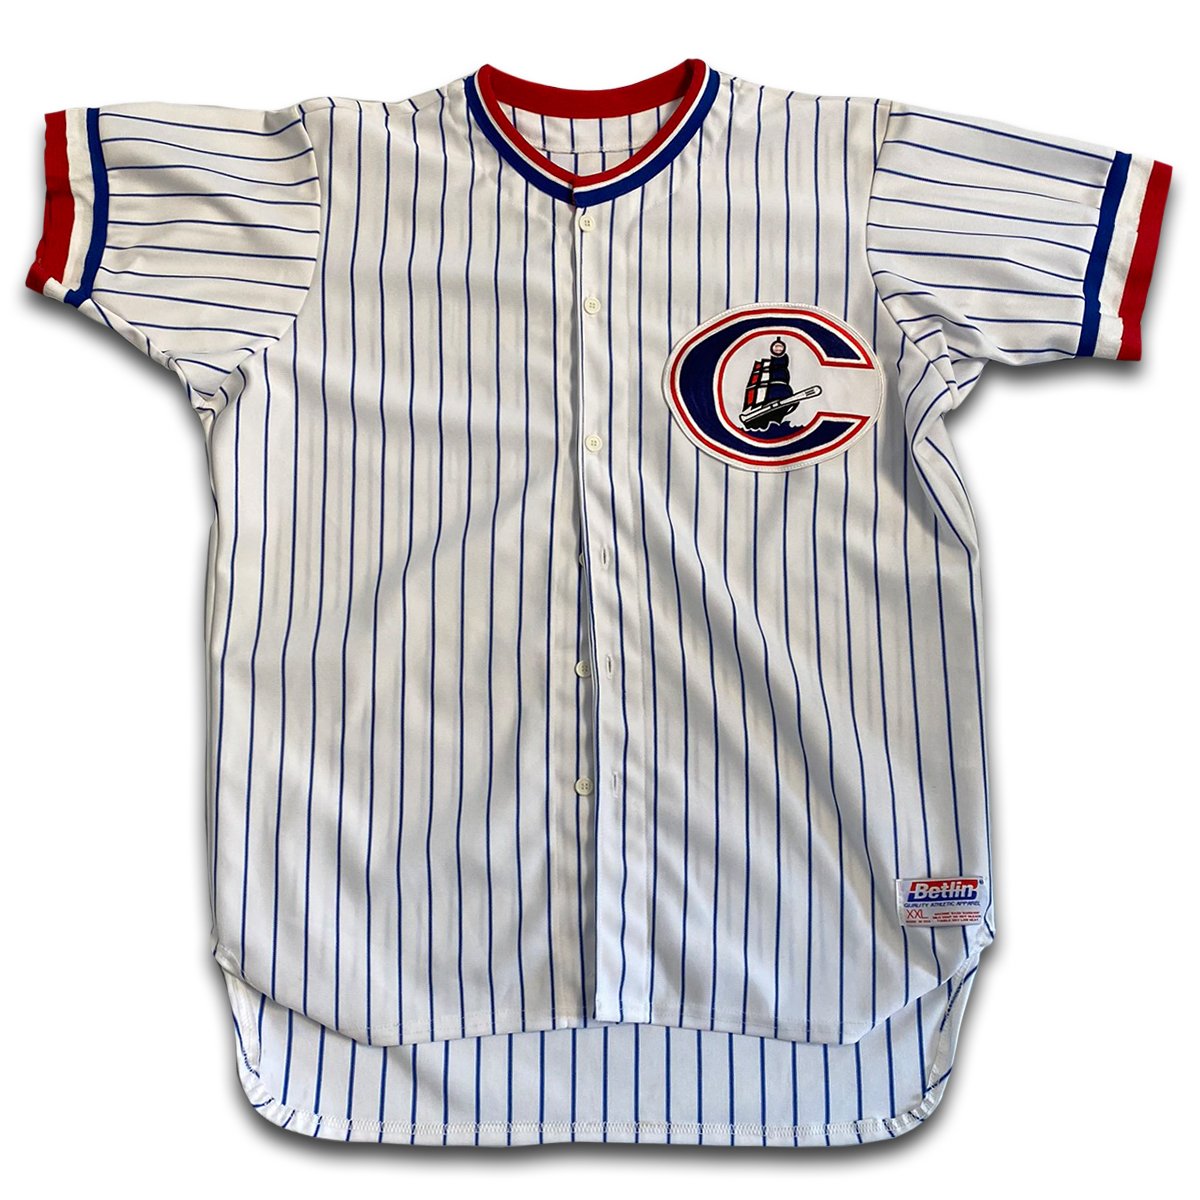 Columbus Clippers Retro Royal Pinstripe #22 Authentic Jersey